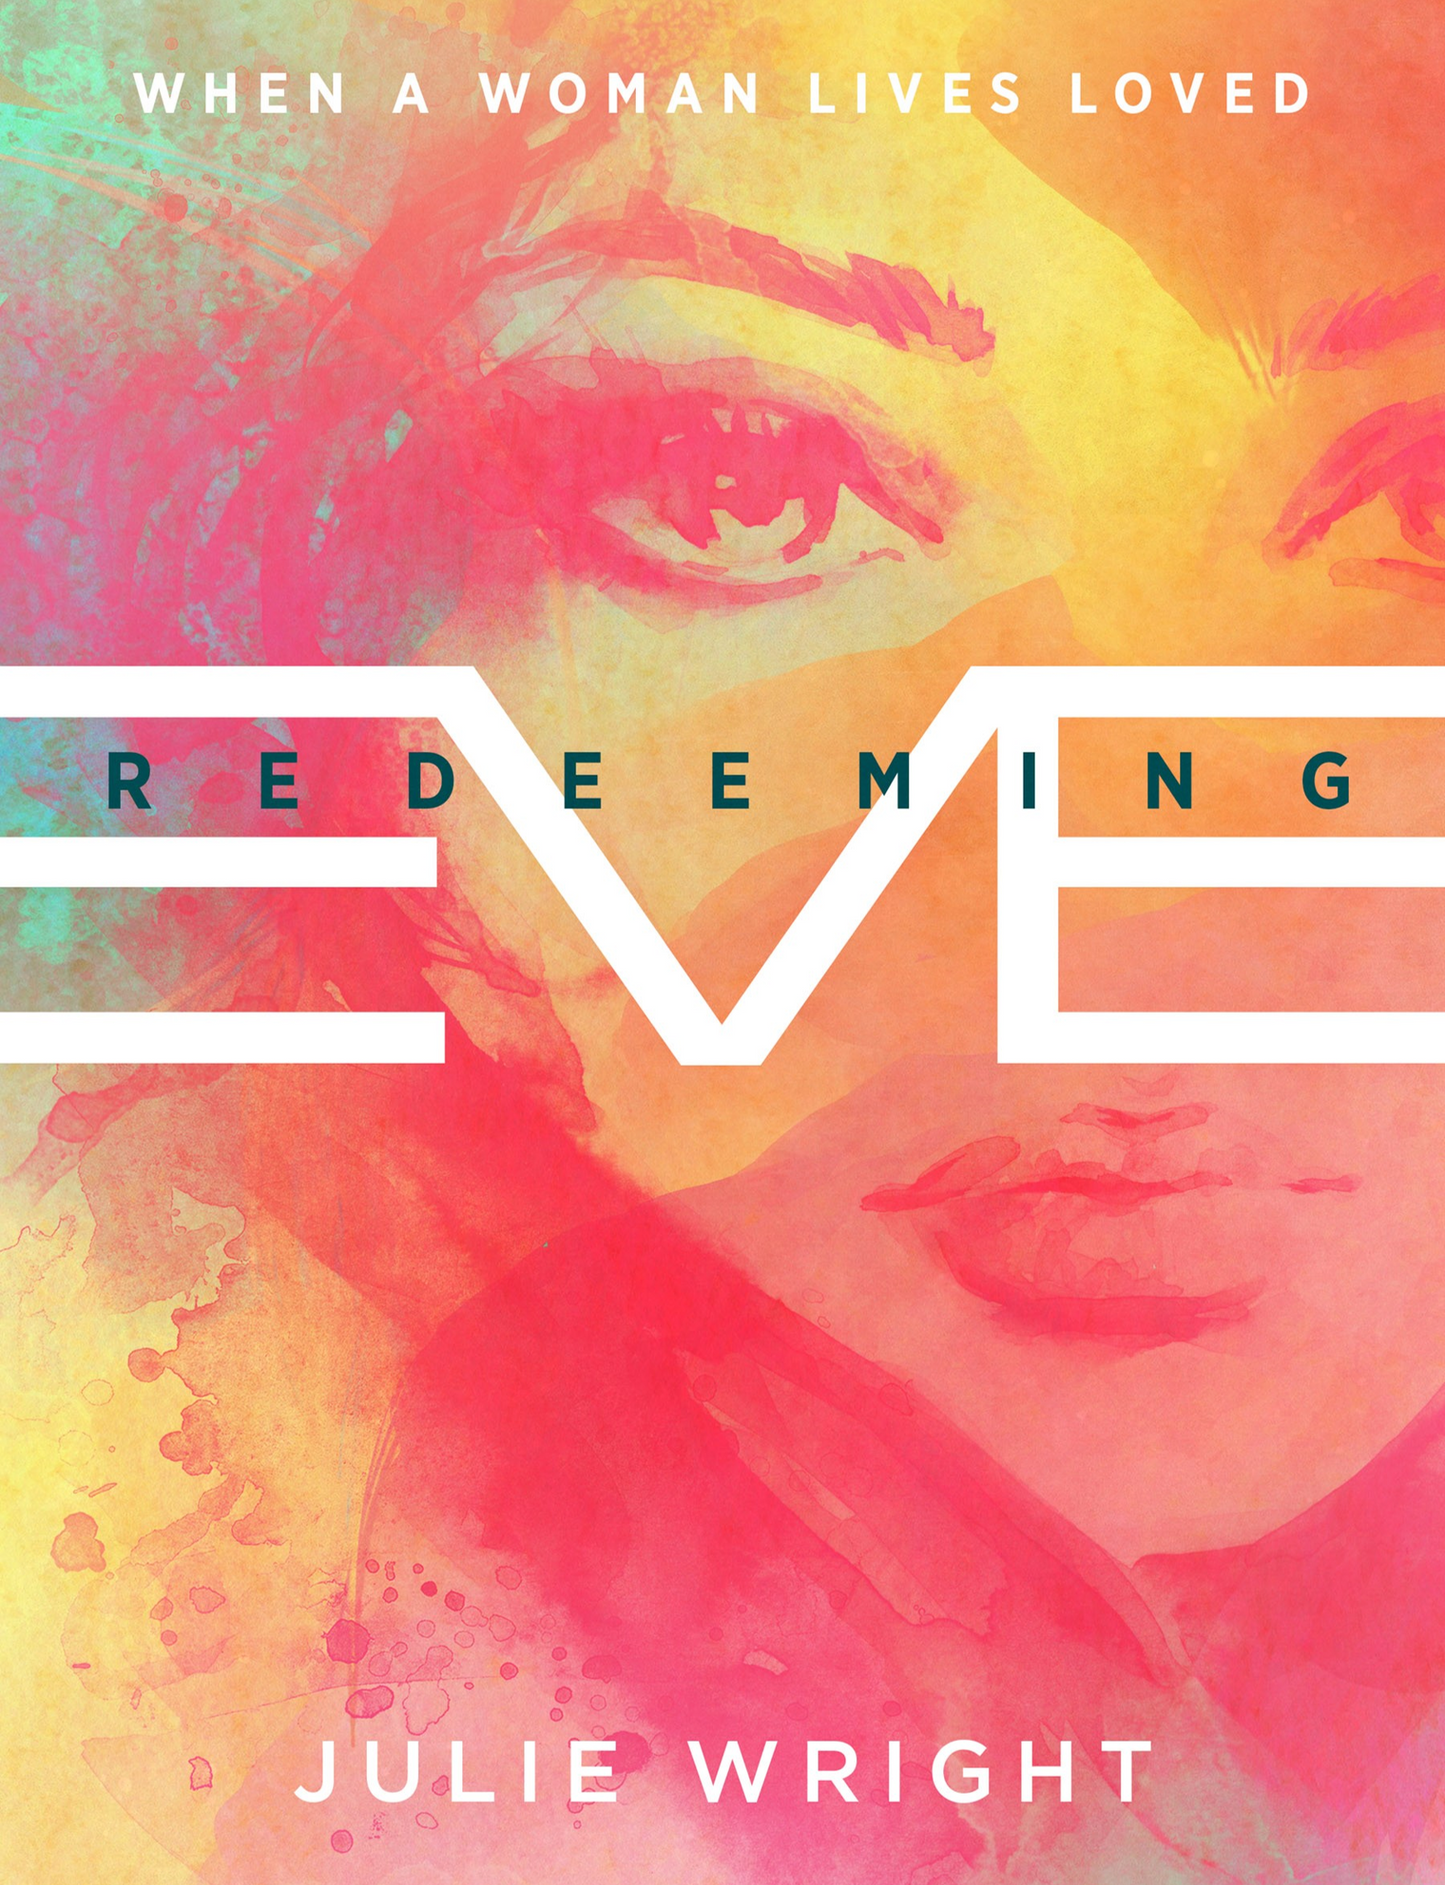 Redeeming Eve - Book Only